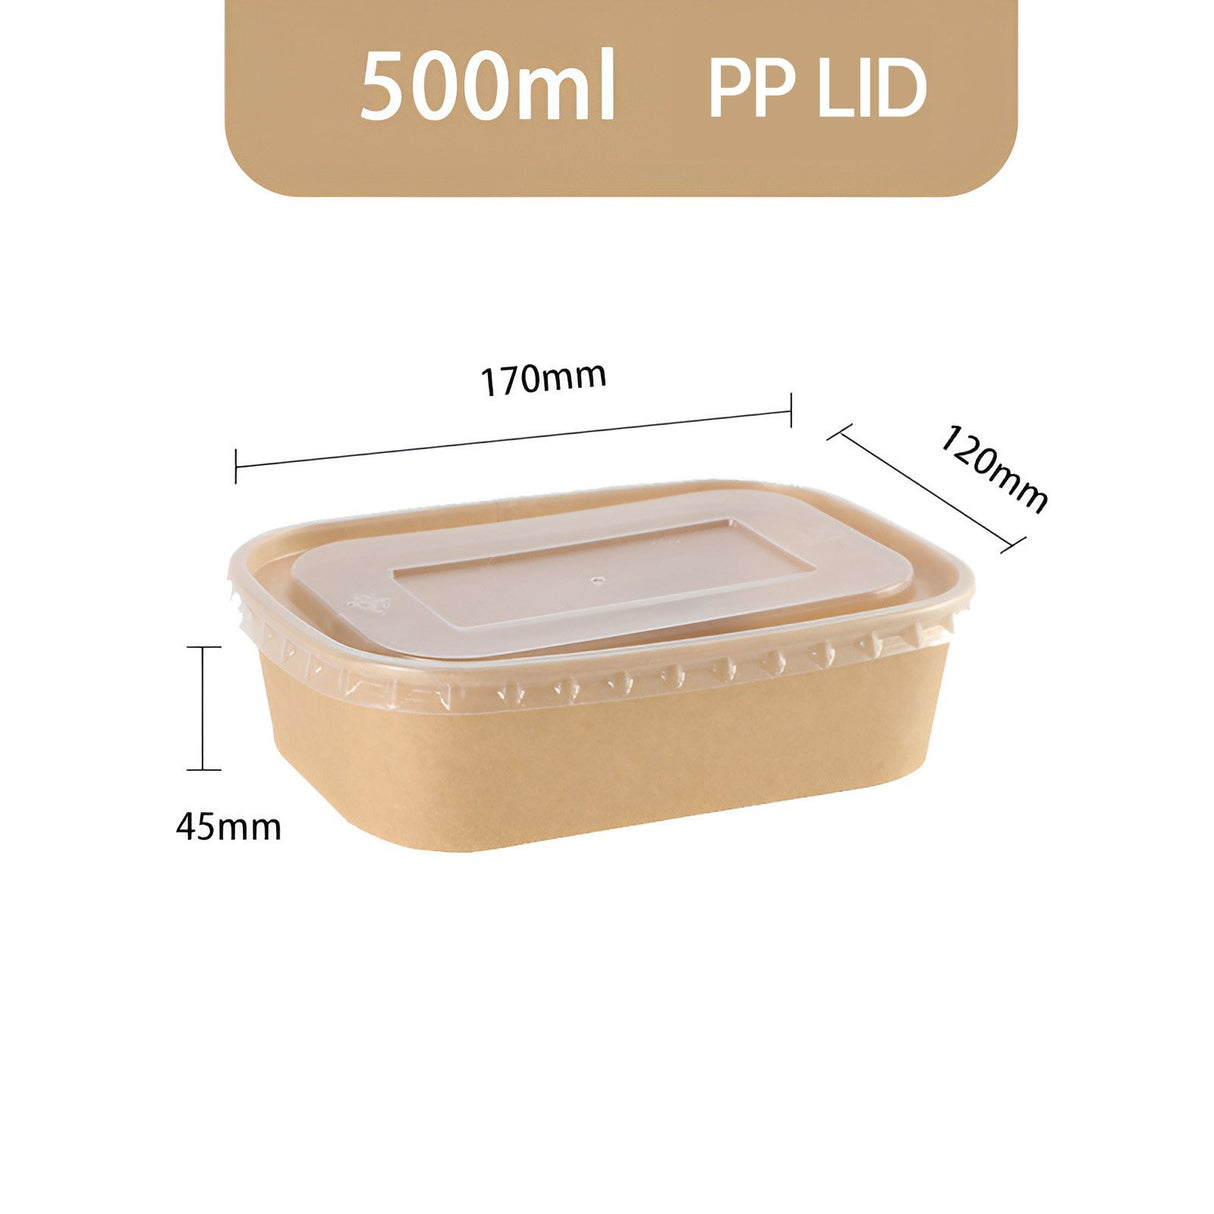 Versatile Kraft Paper Food Containers with Secure Lids